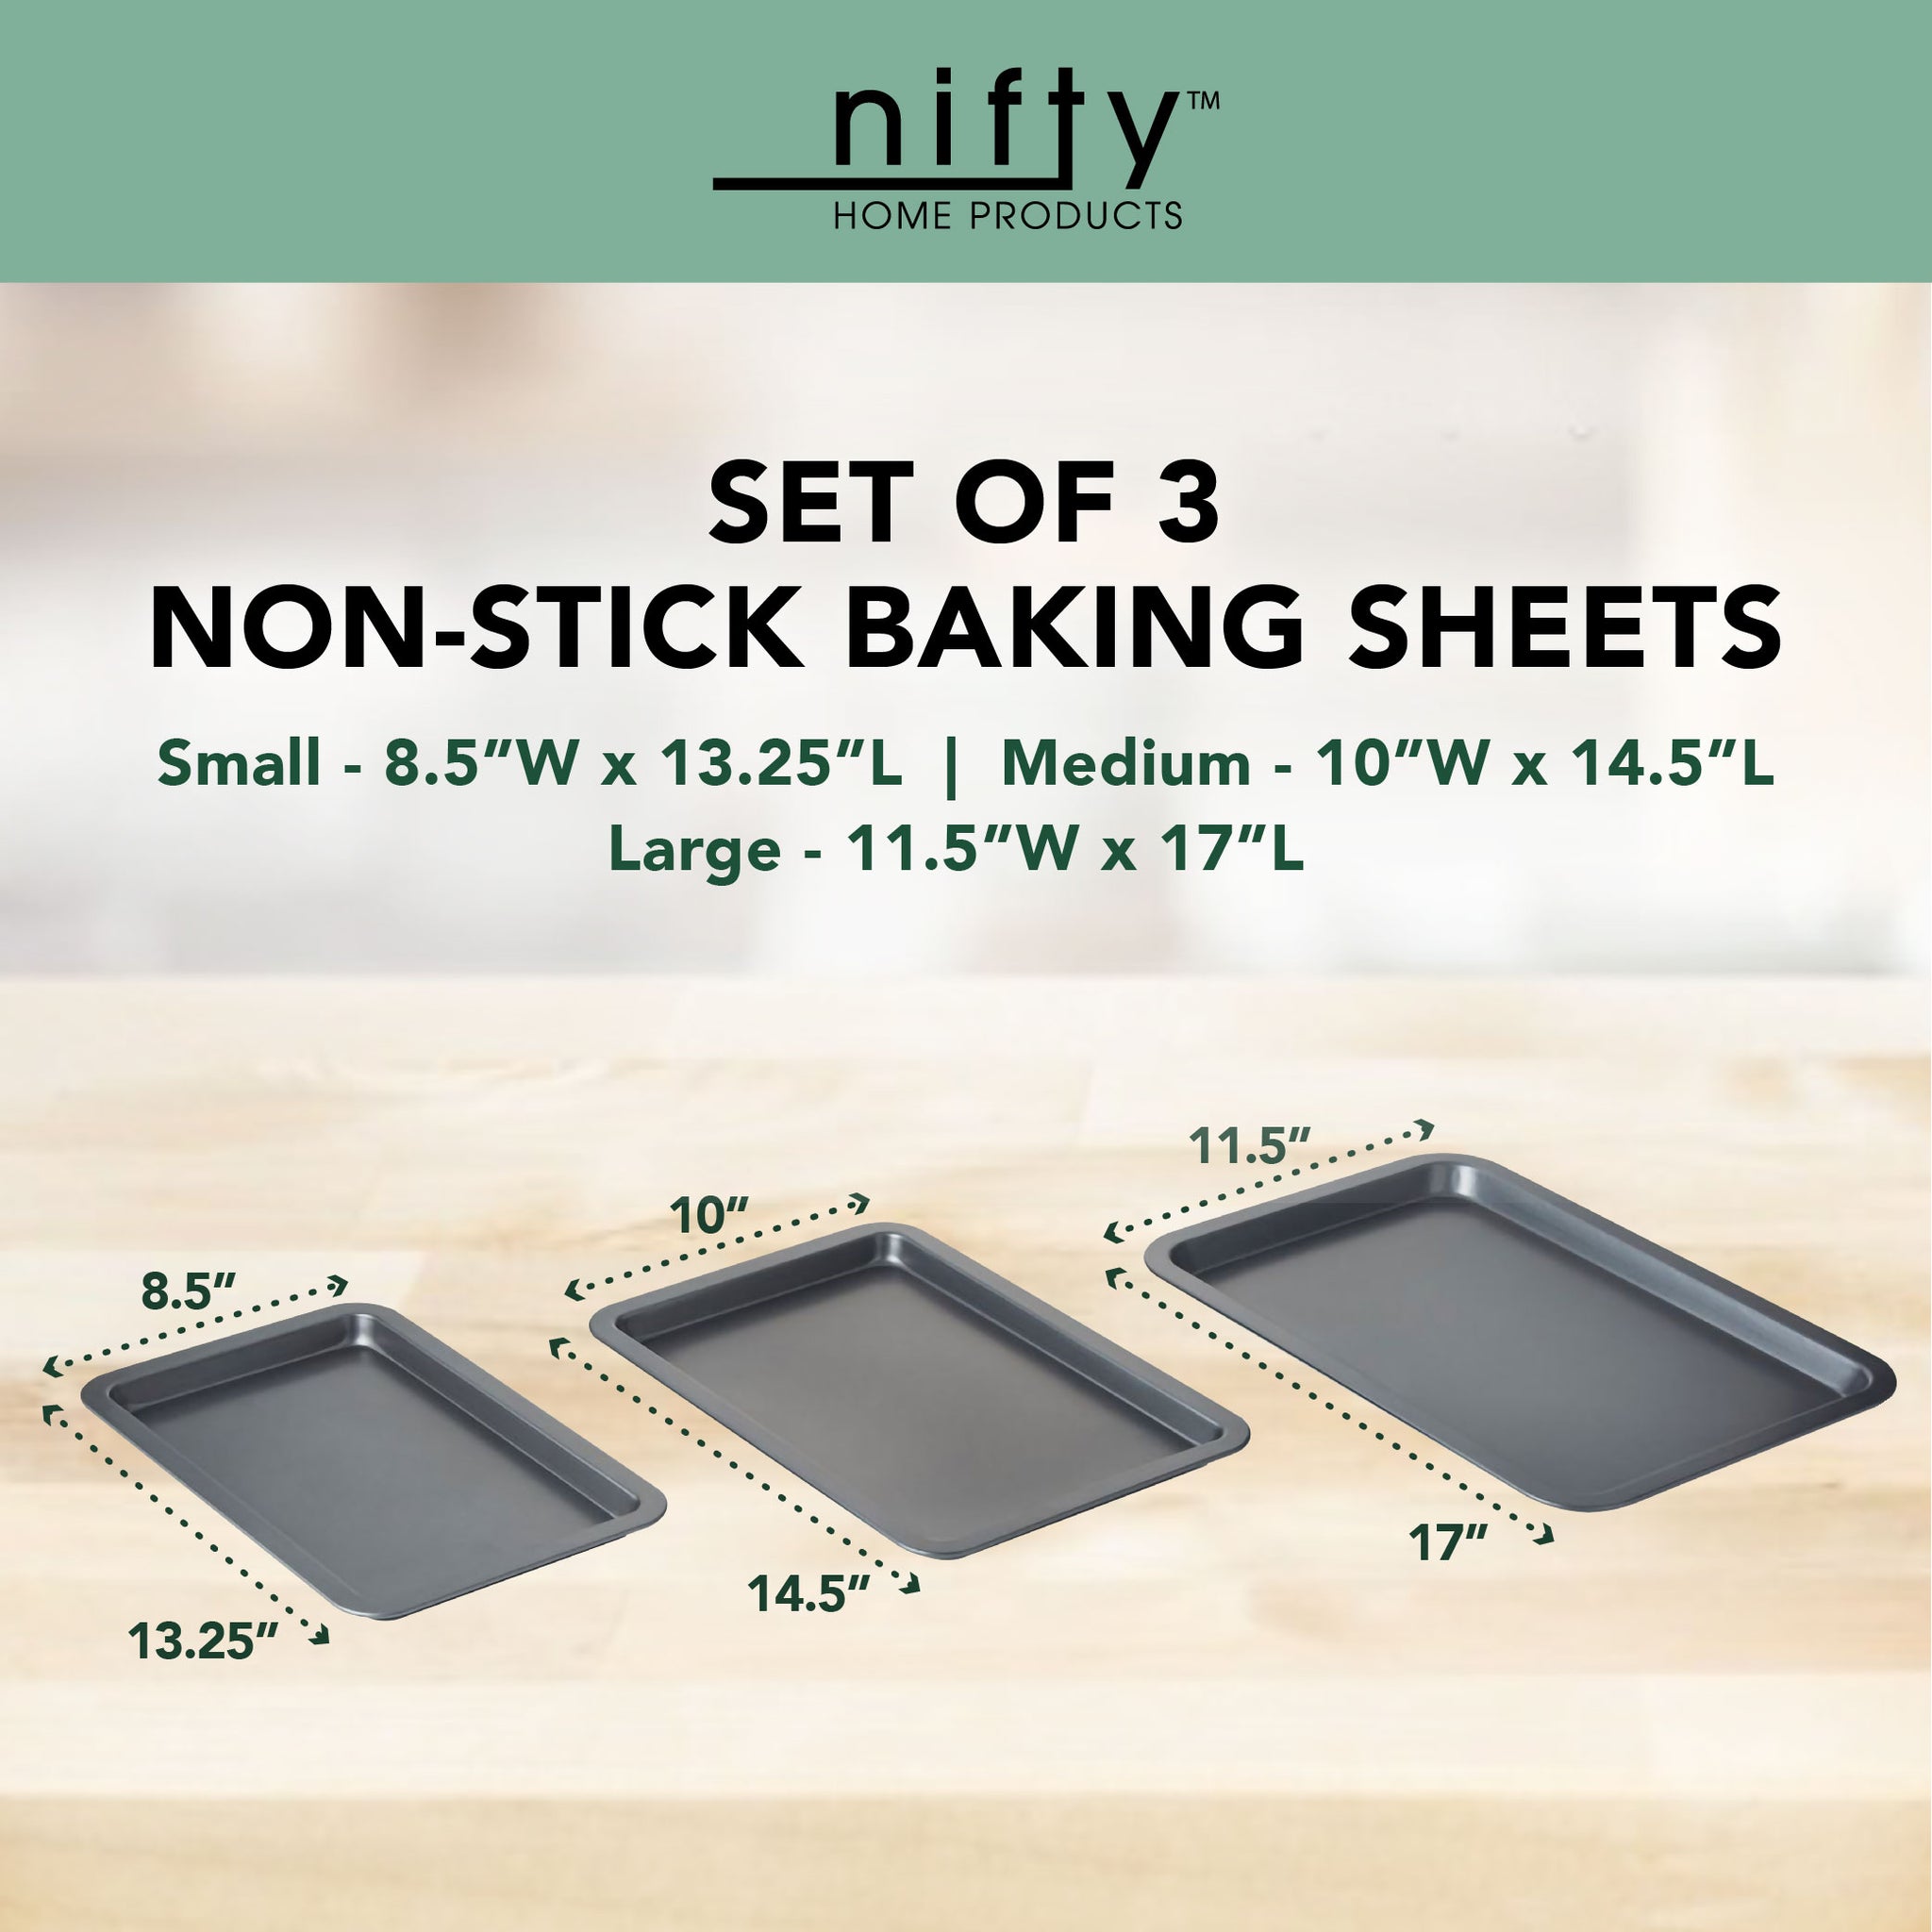 Set of 3 Non-Stick Cookie and Baking Sheets by Nifty – Nifty Home